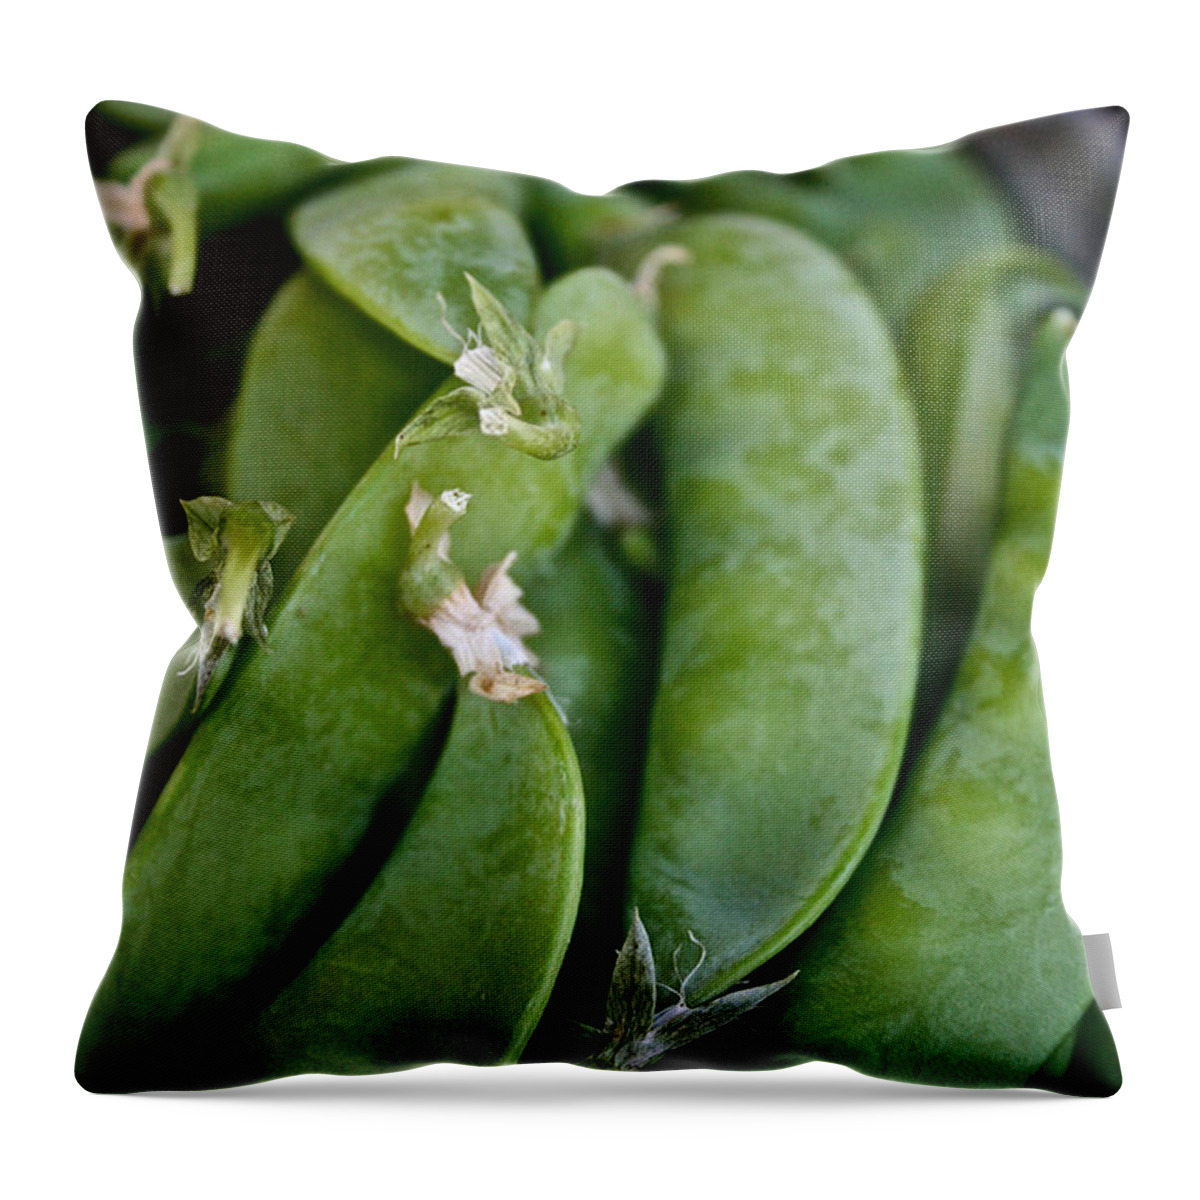 Food Throw Pillow featuring the photograph Snap Peas Please by Susan Herber